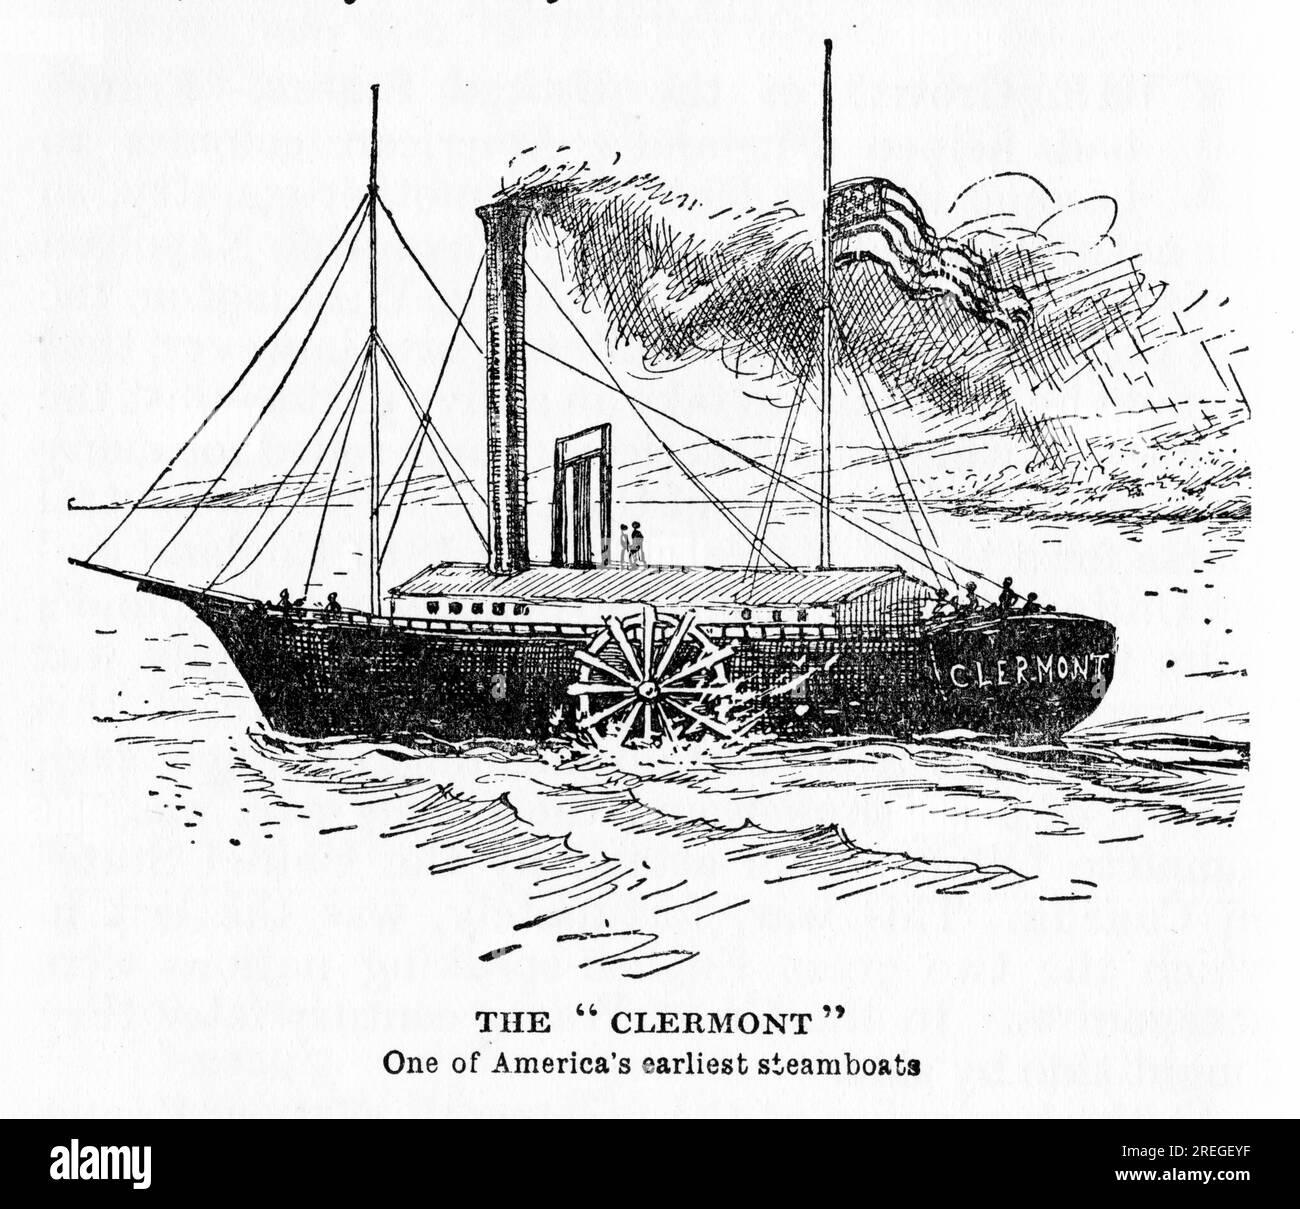 the Clermont, one of America's earliest steamboats Stock Photo